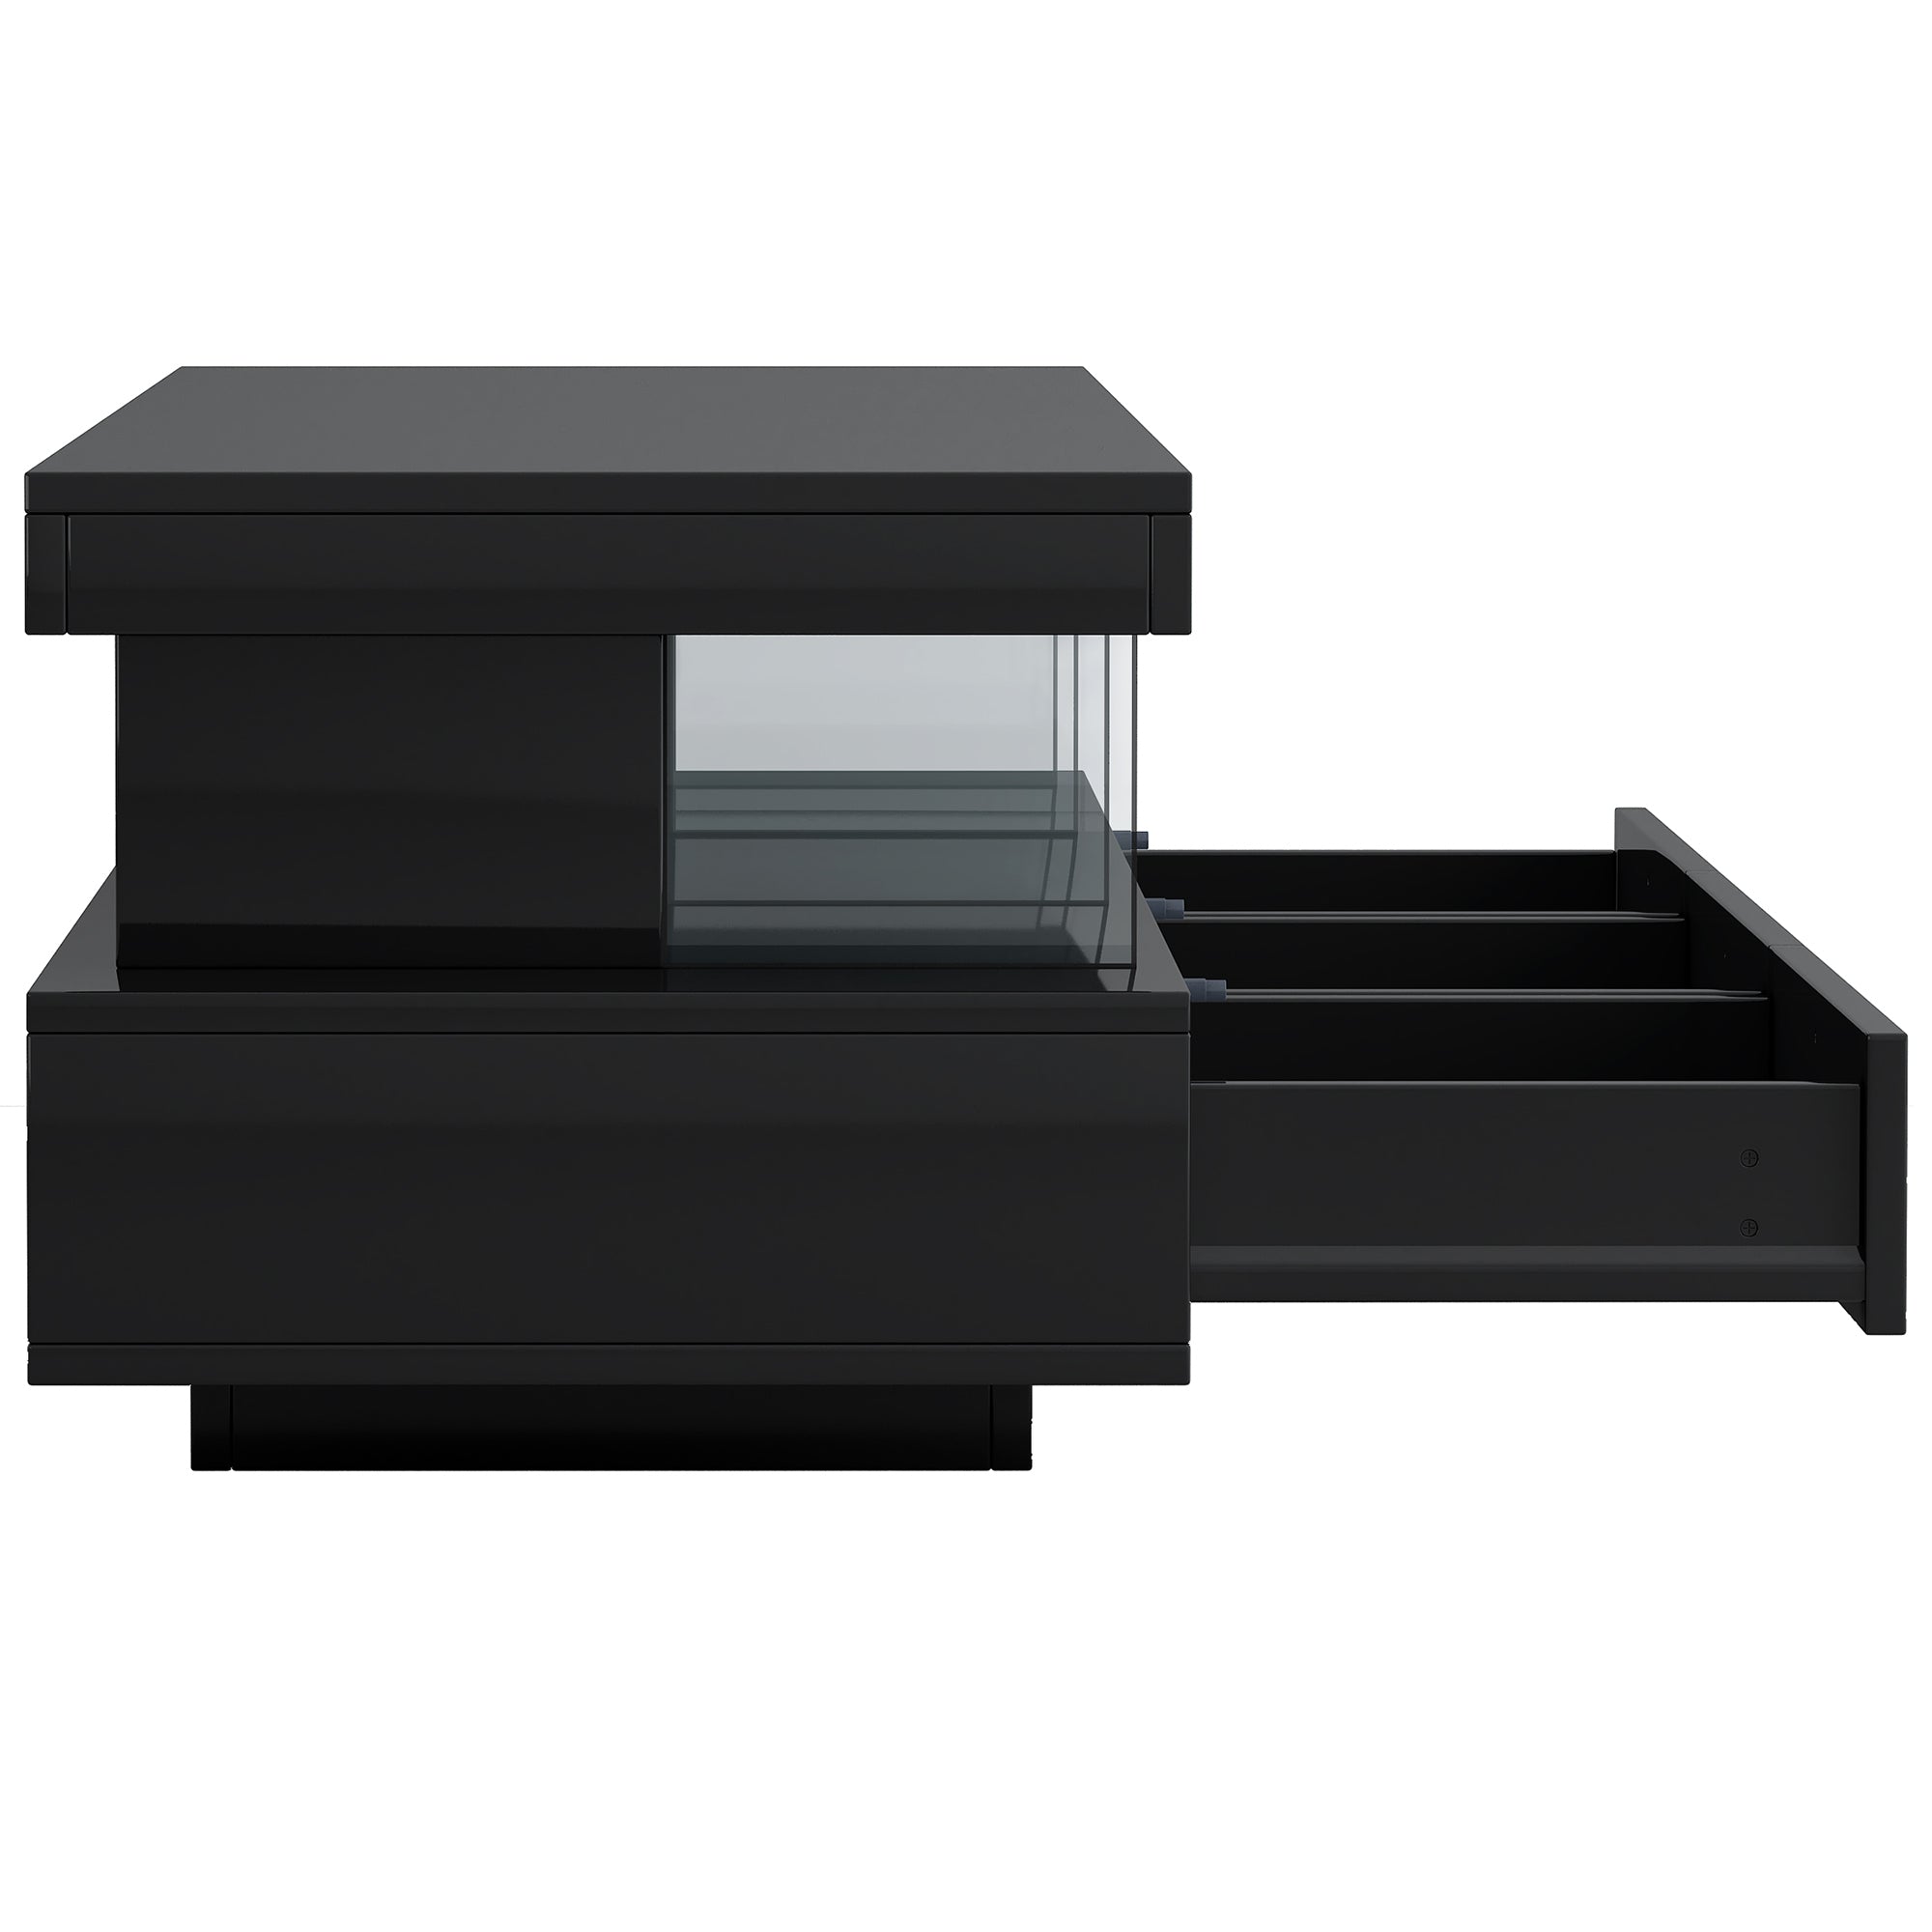 65" Black Glossy Modern TV Stand with LED Light Fits TV up to 75"